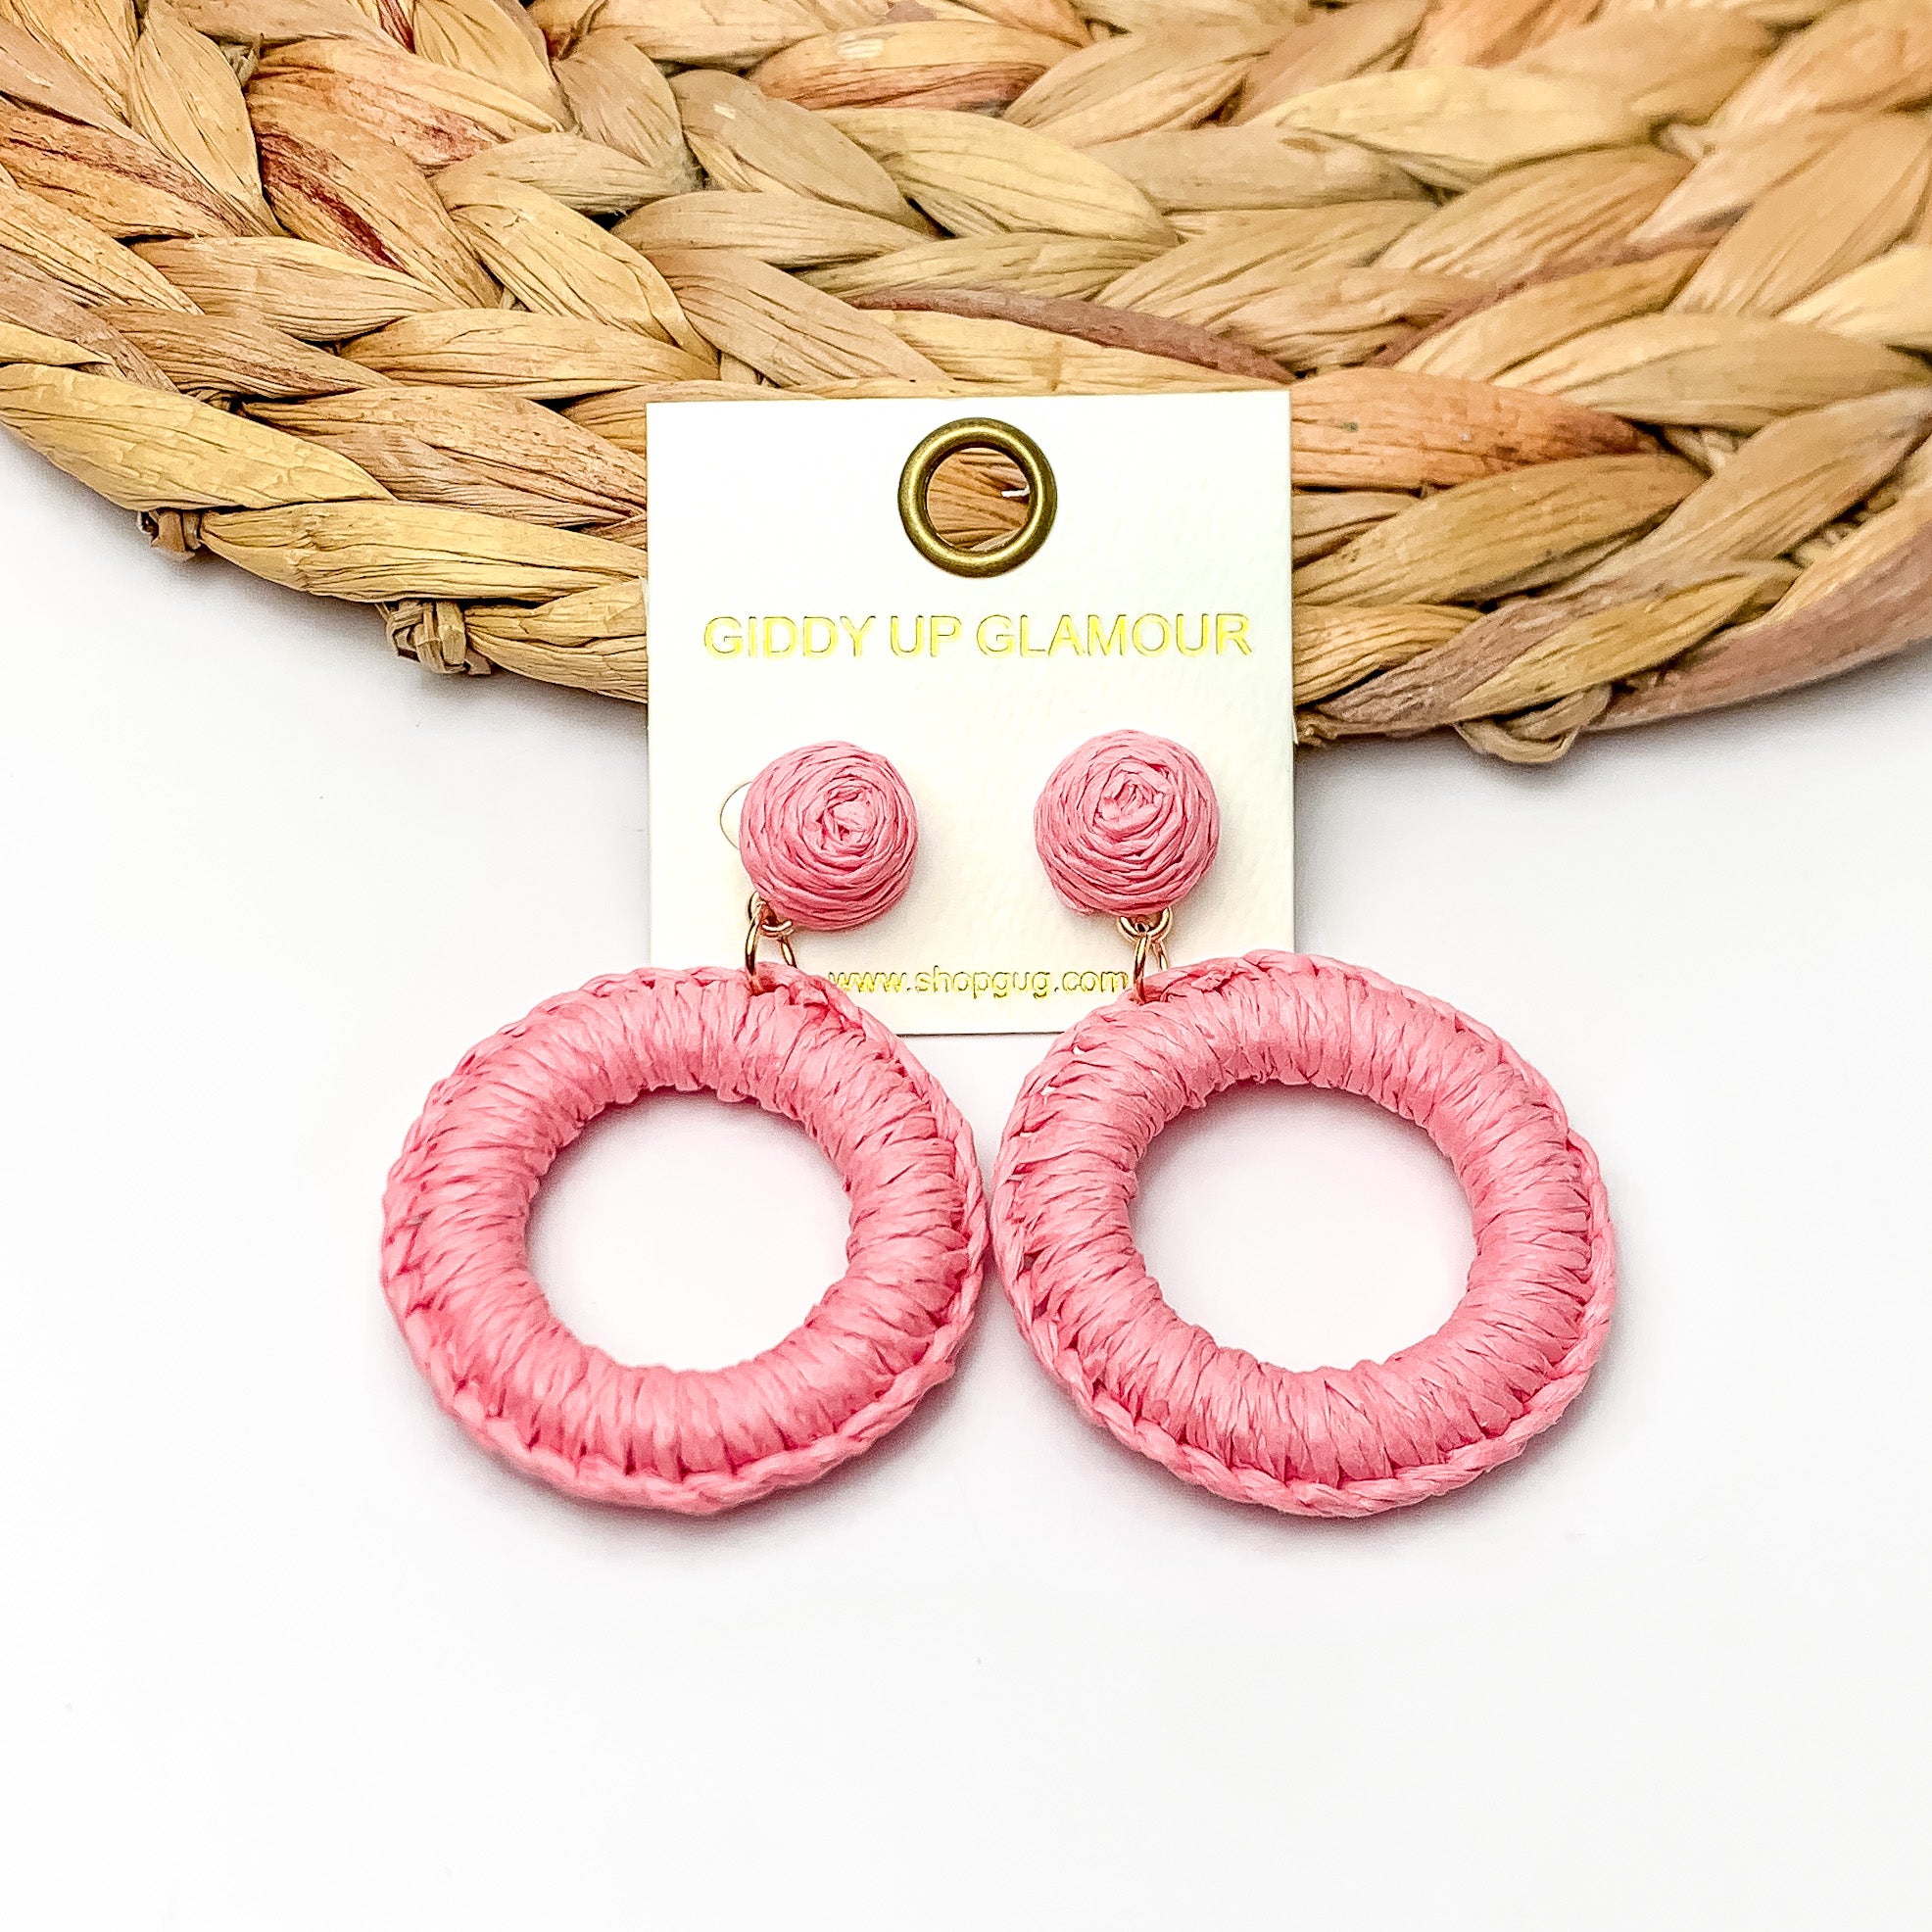 Beachside Café Raffia Wrapped Circle Earrings in Light pink. Pictured on a white background with the top of the earrings laying on a brown circle decorative piece.